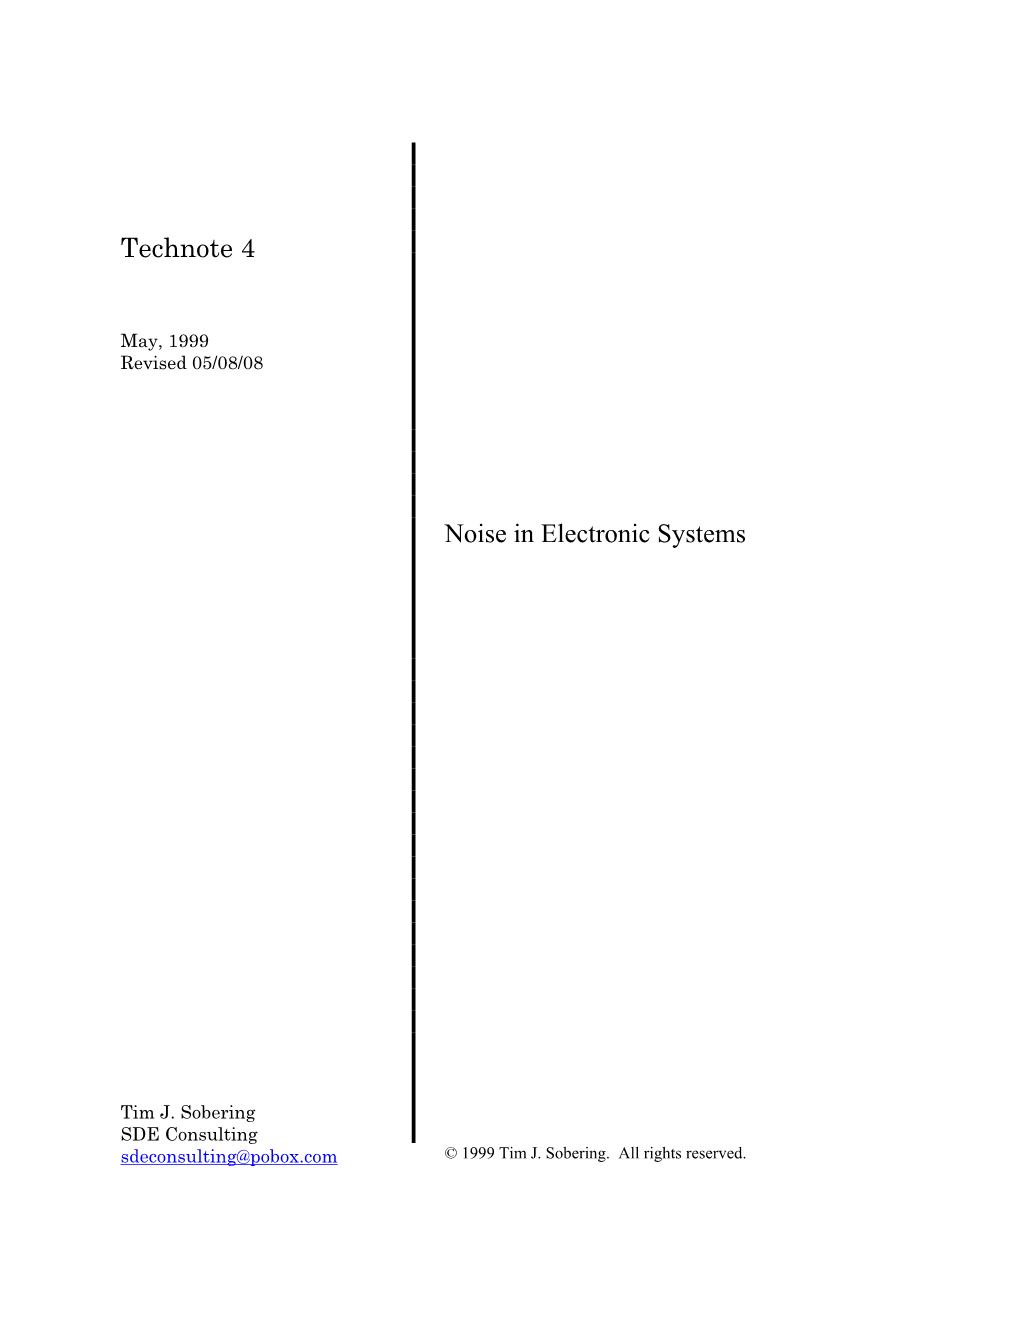 Technote 4 Noise in Electronic Systems